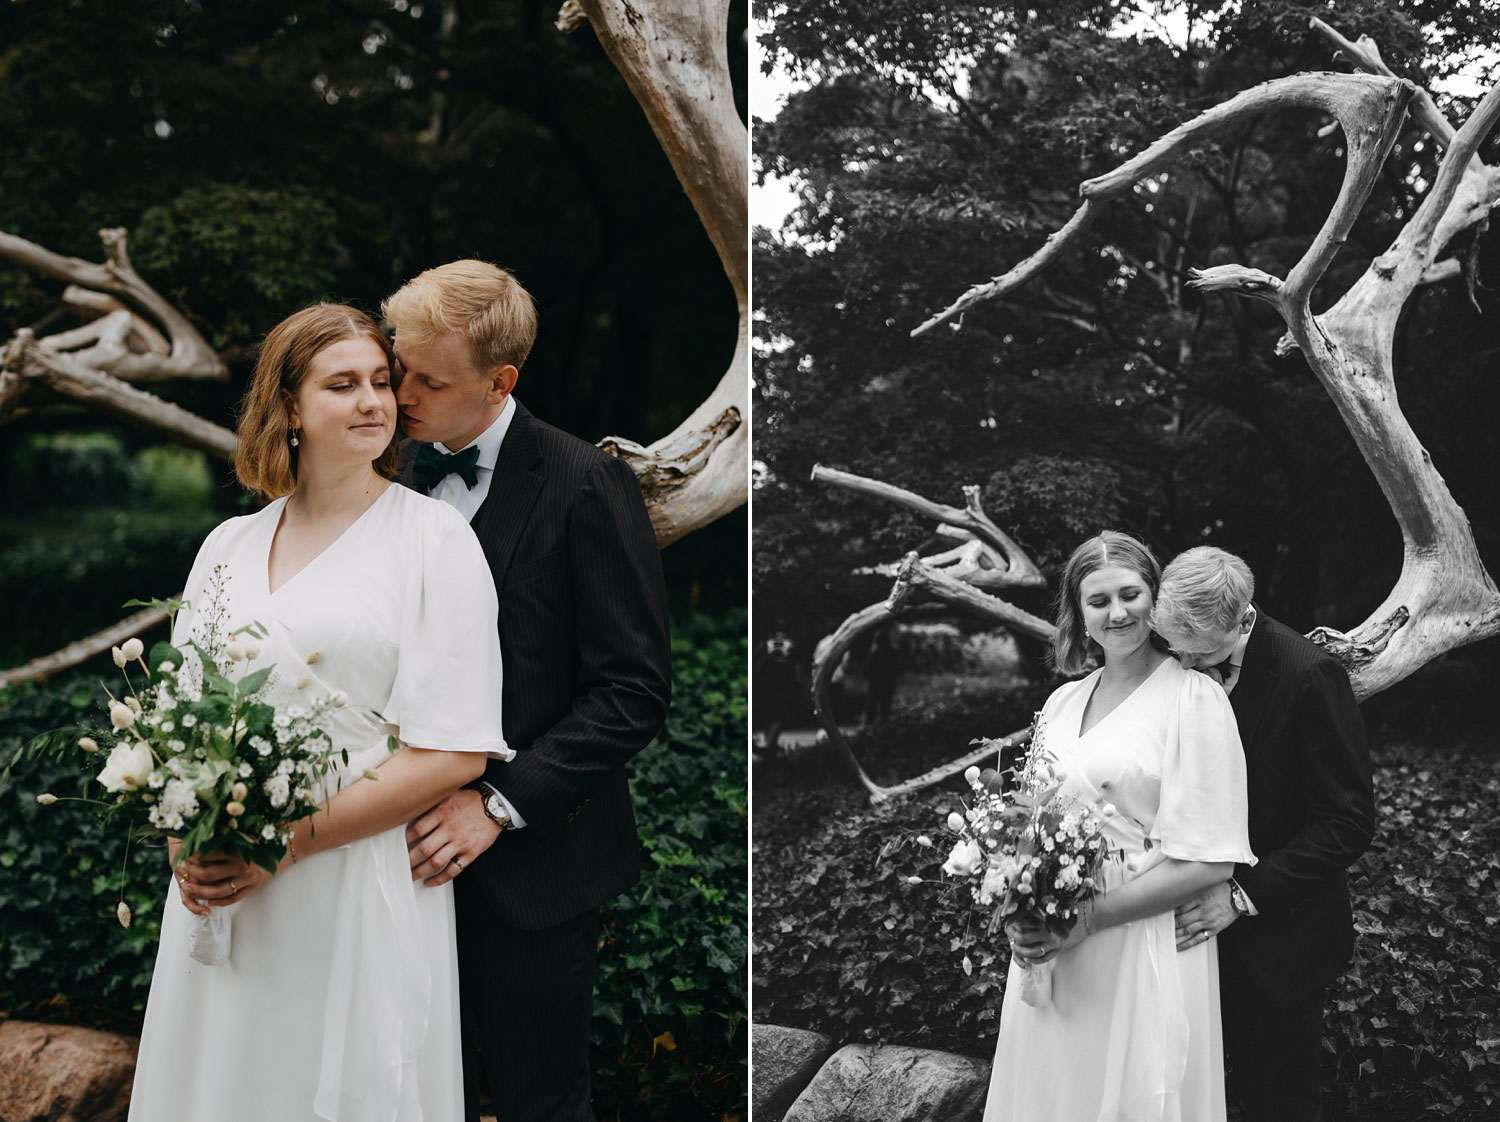 Romantic wedding photo of a couple in Frederiksberg Have, with the park's beauty as their backdrop